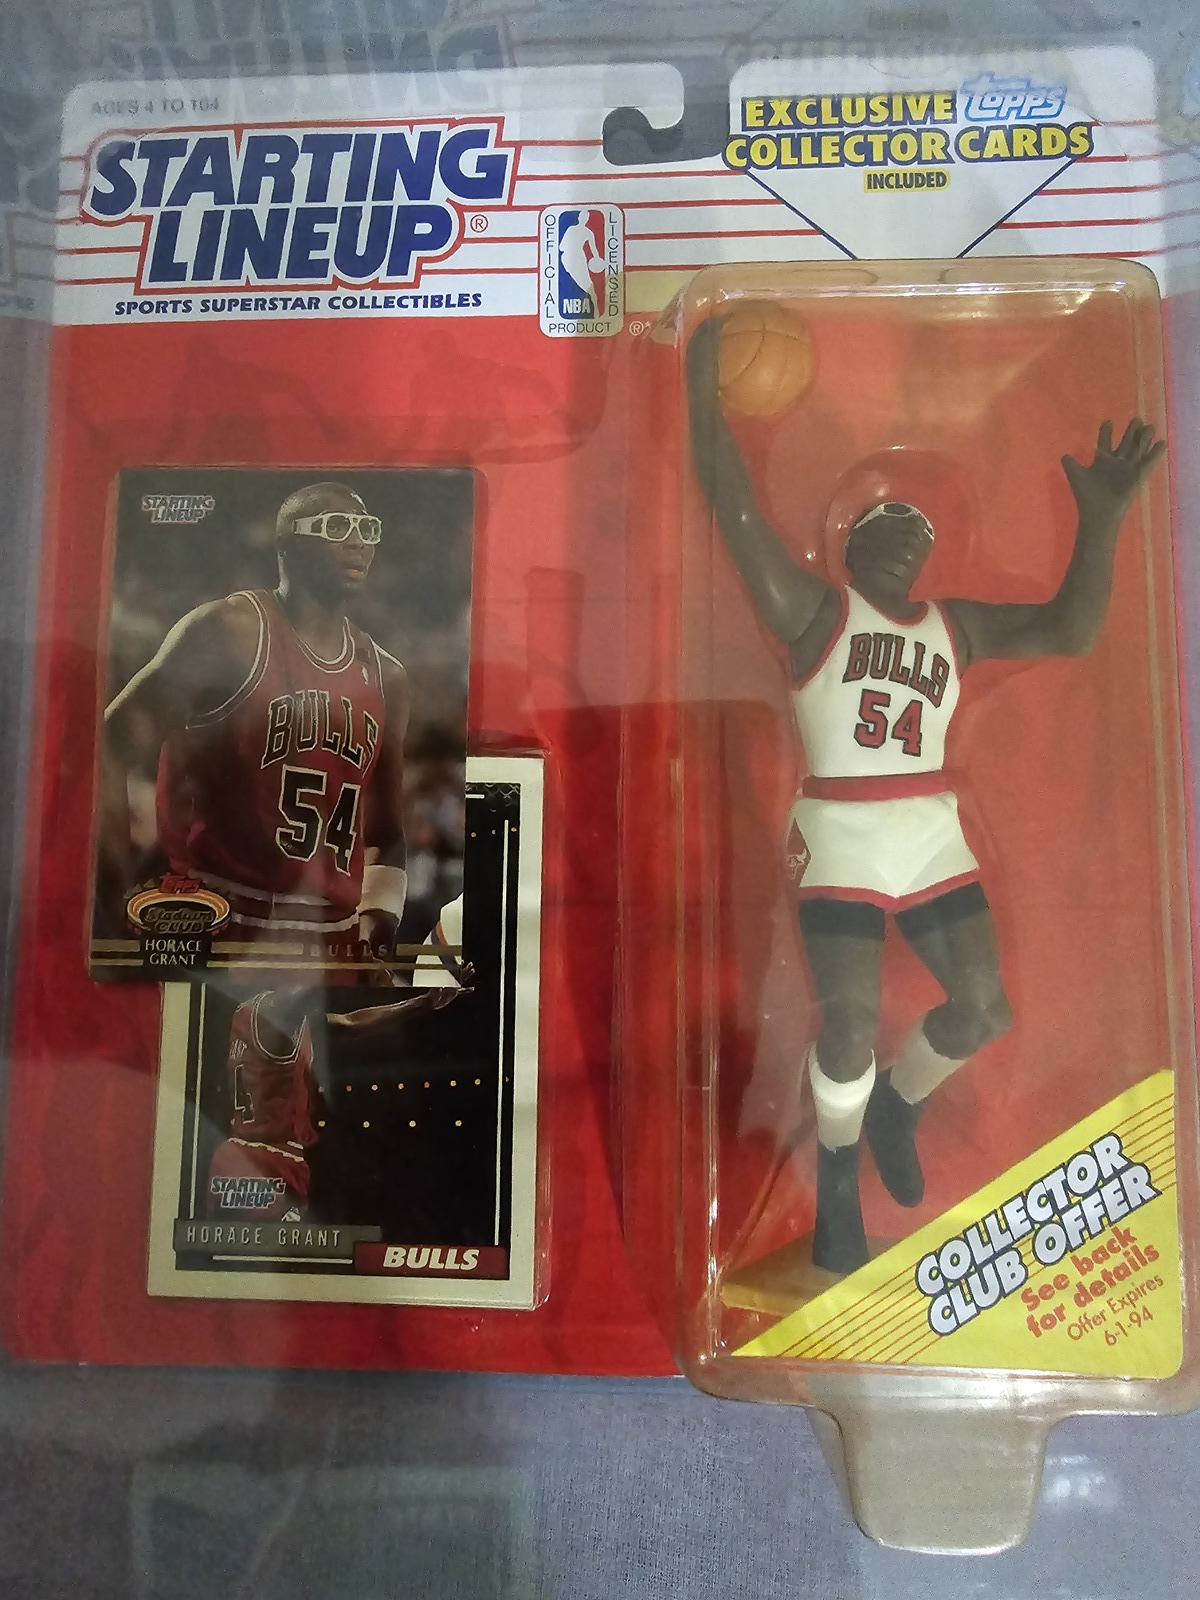 Primary image for Sports Horace Grant 1993 Starting Lineup Action Figure with Card